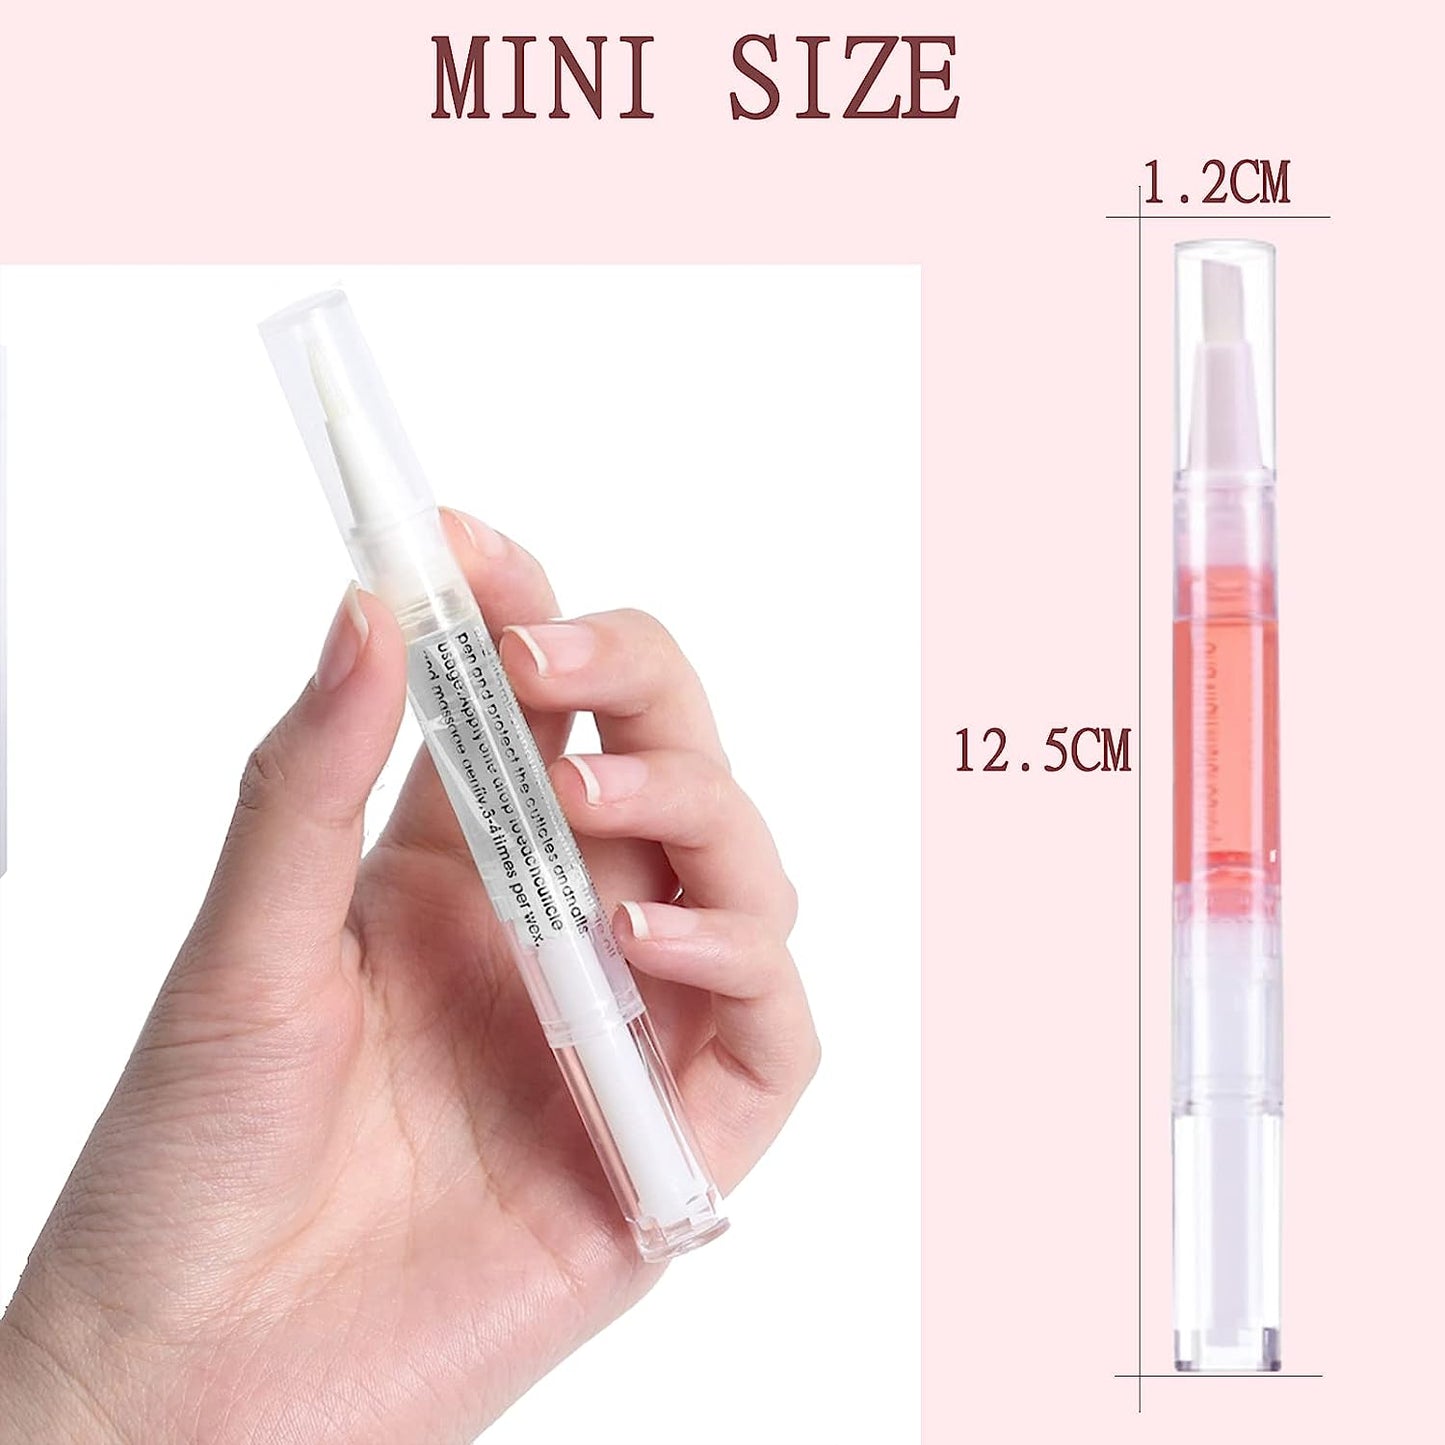 Gleevia Cuticle Oil Pen for Nail Care, 1PCS Cuticle Oil Nail Nutrition Oil With Natural Ingredients Revitalize Pen for Nail Growth Moisturizing